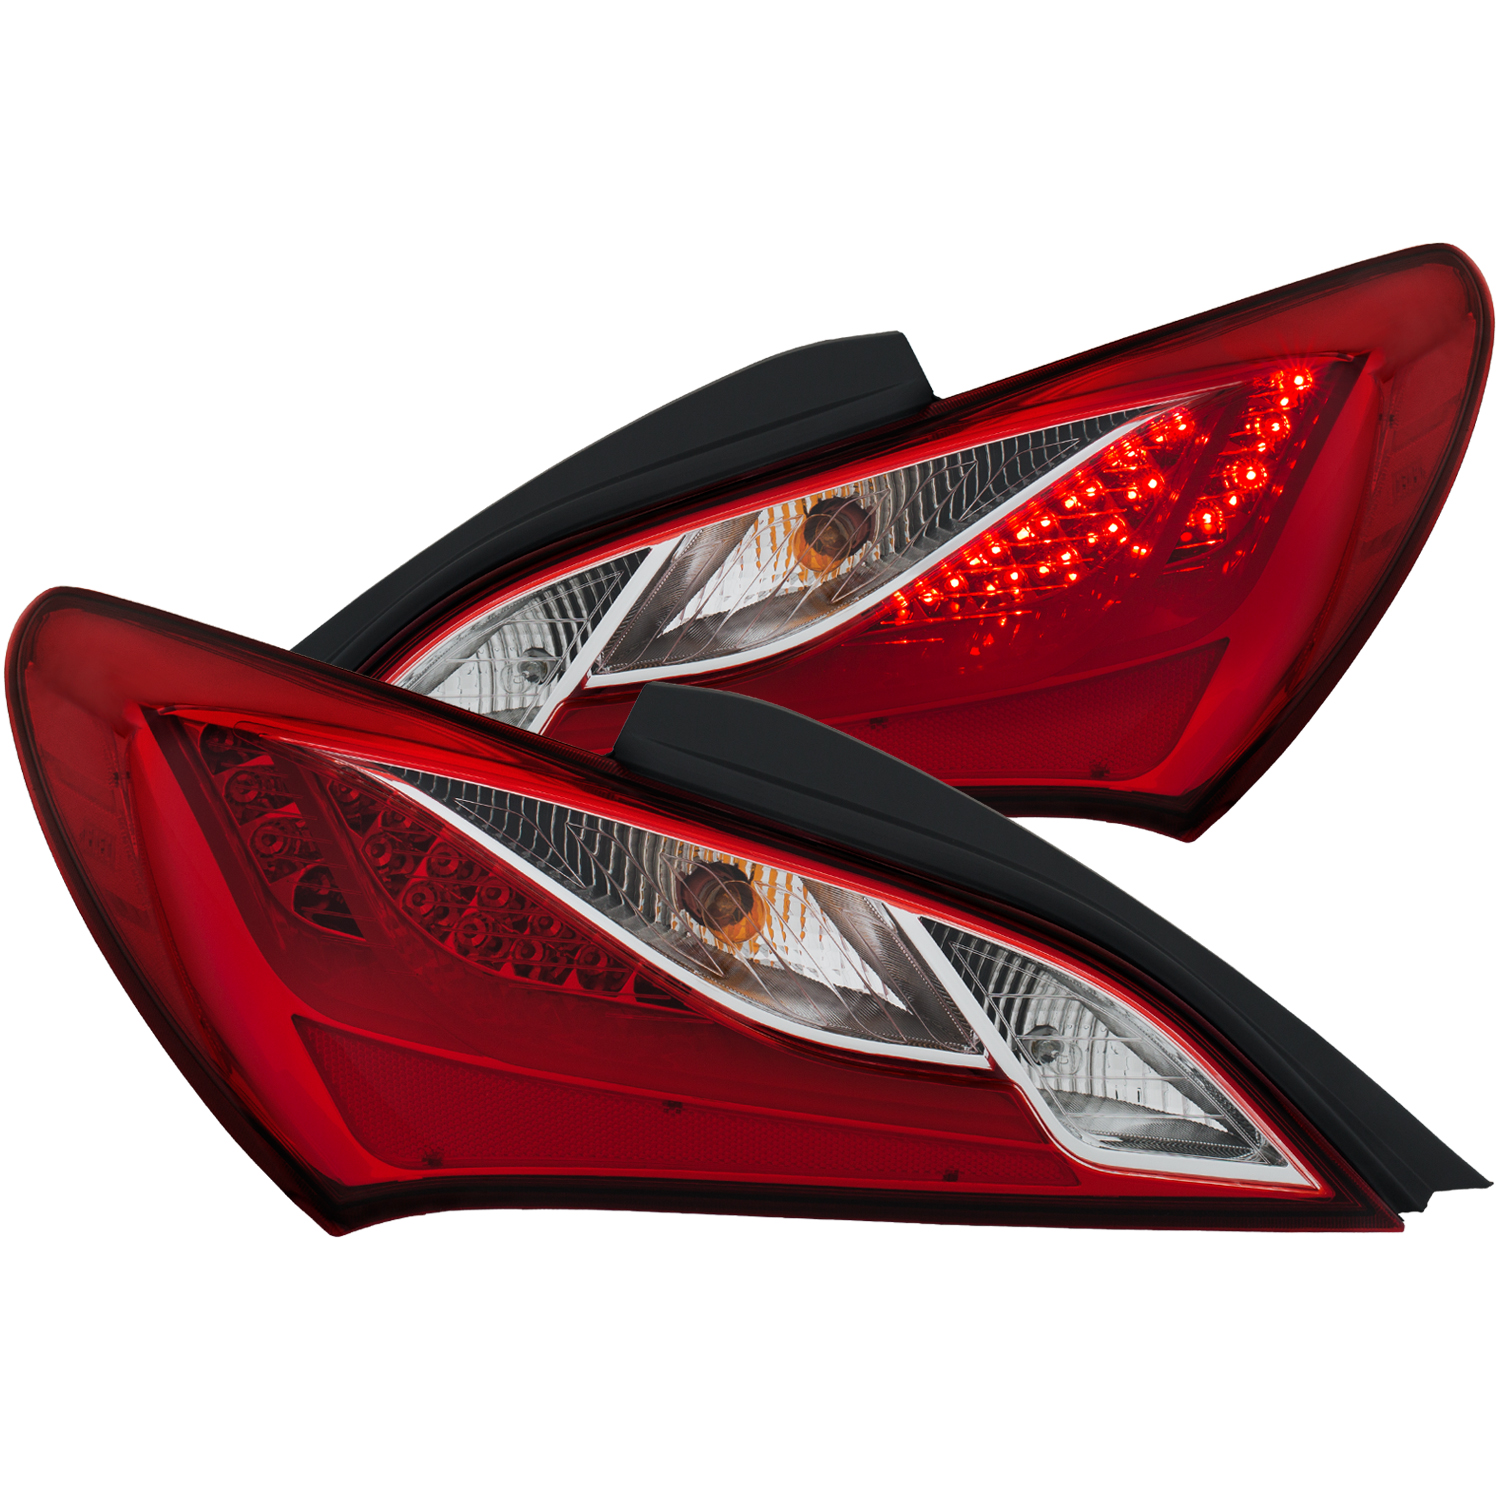 Anzo 321334 LED Tail Light Assembly for 20102013 Hyundai